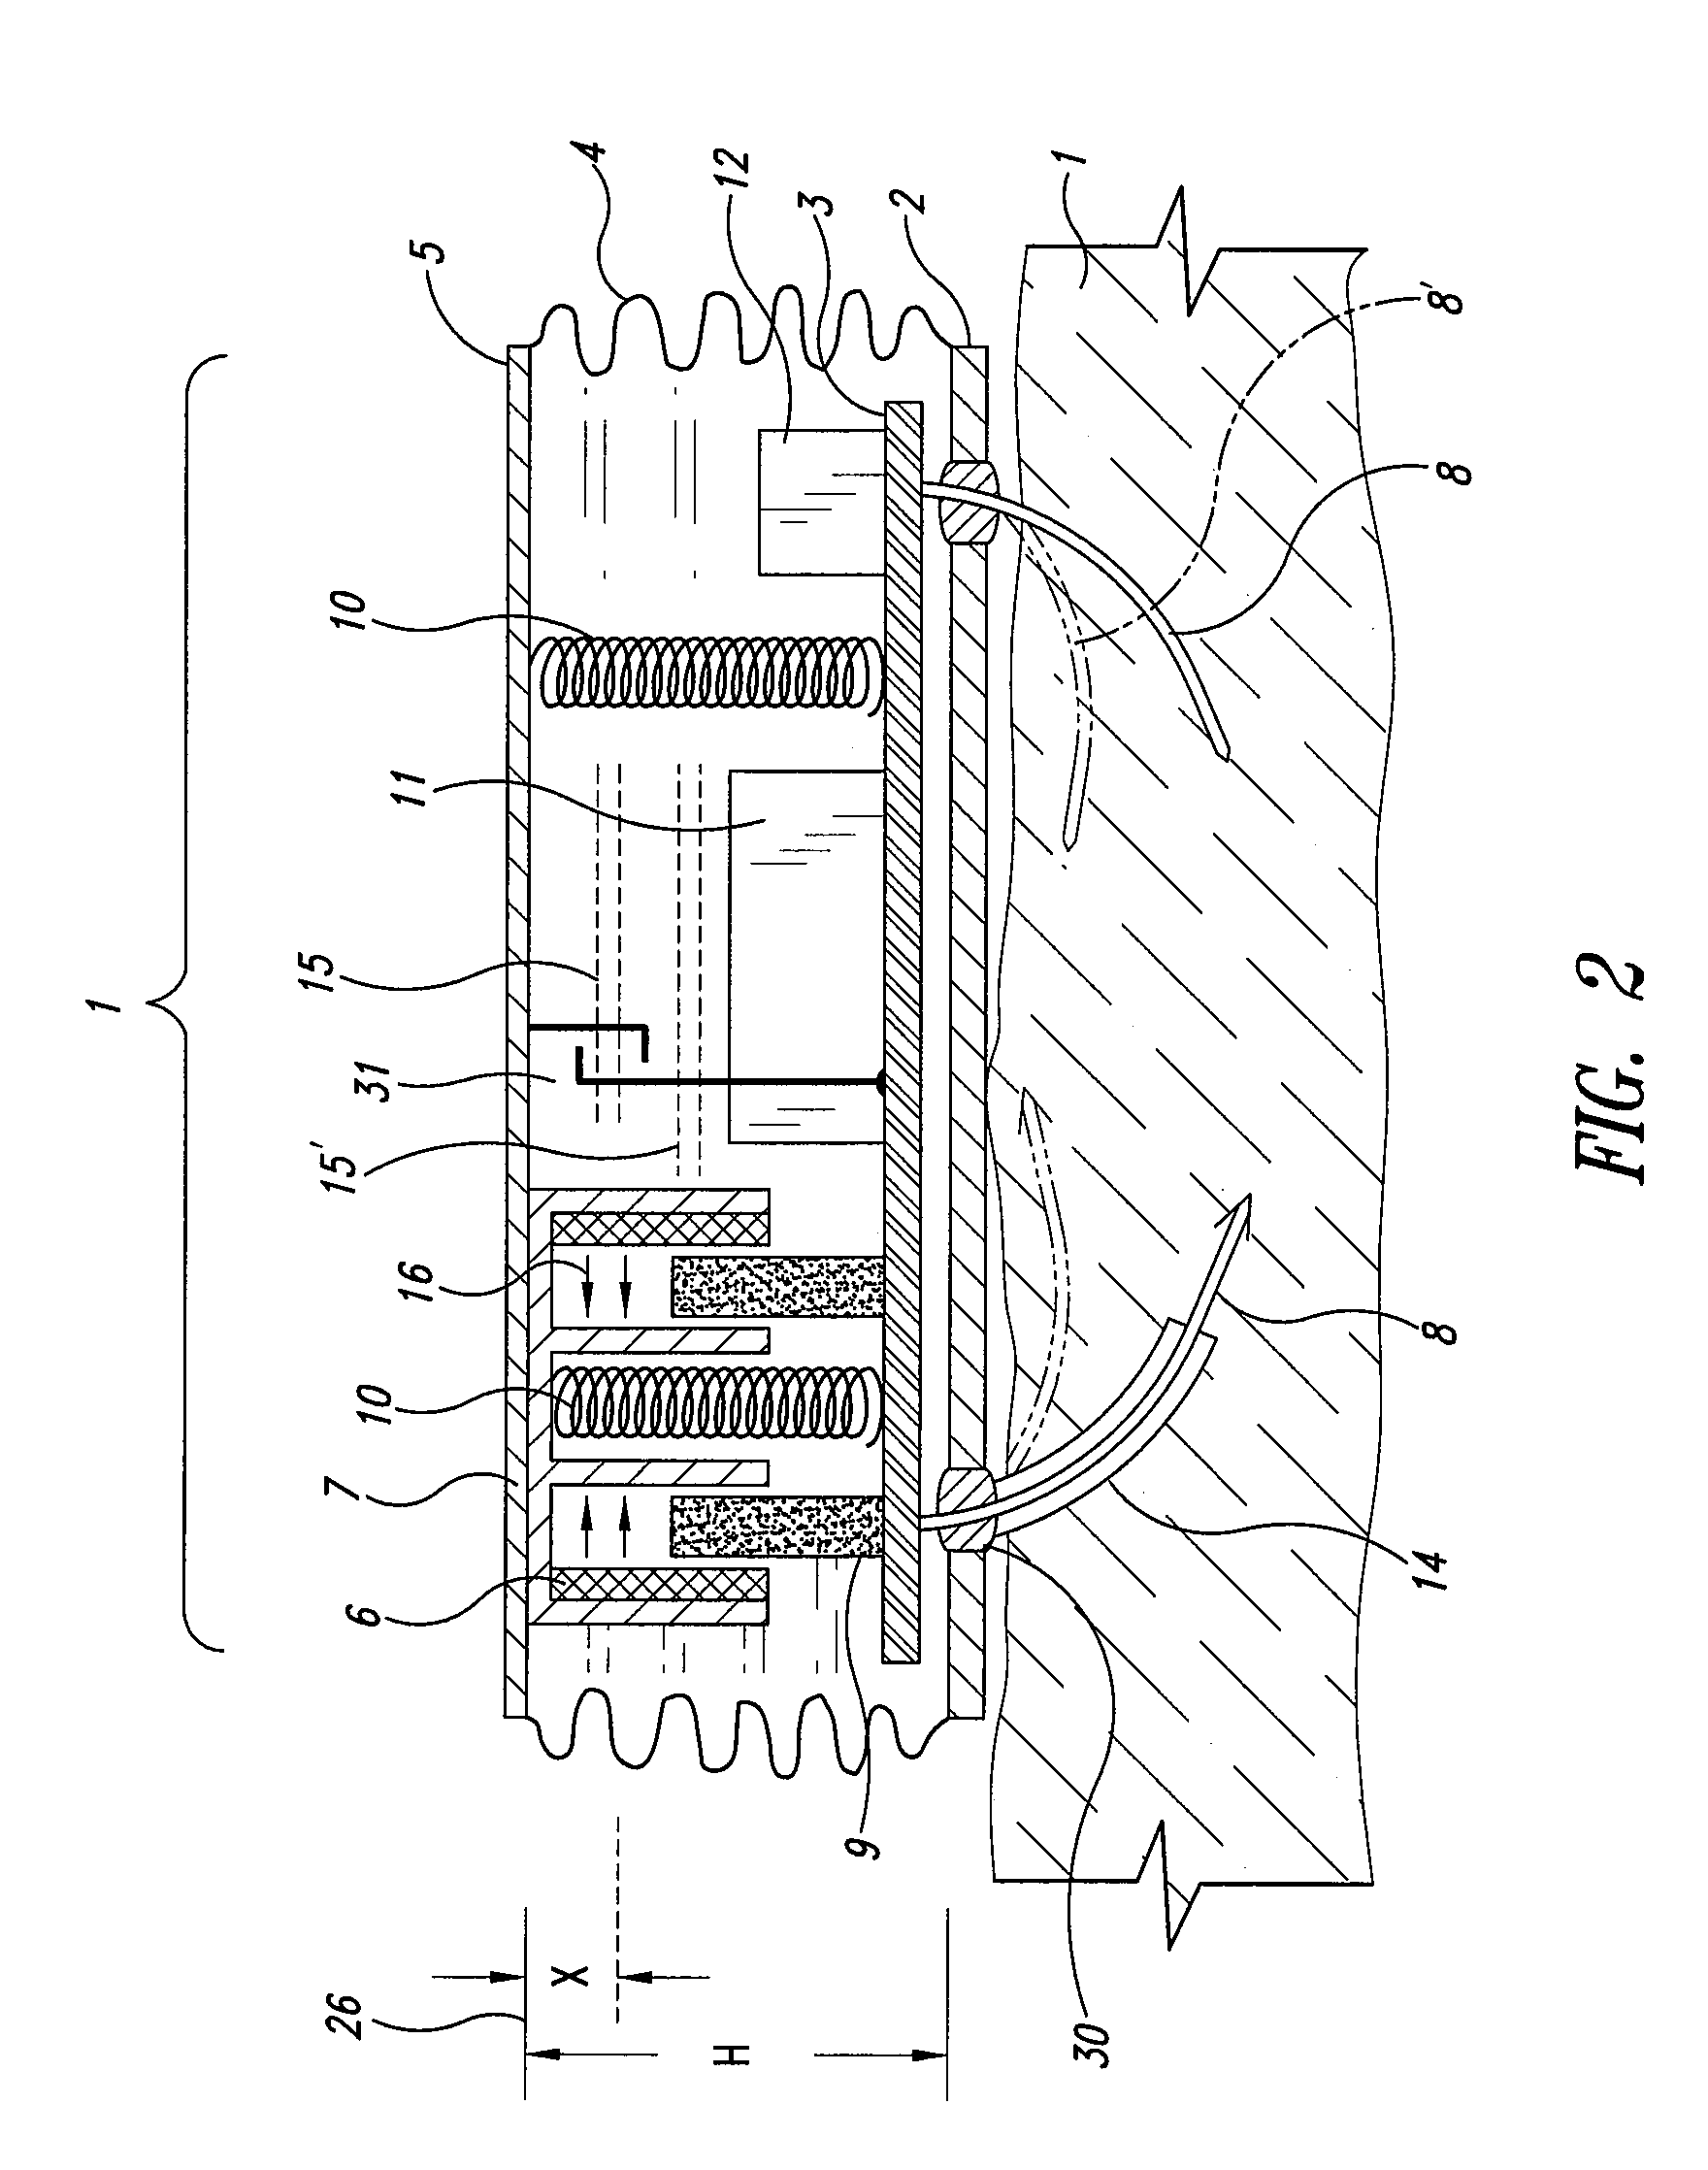 Self-powered leadless pacemaker